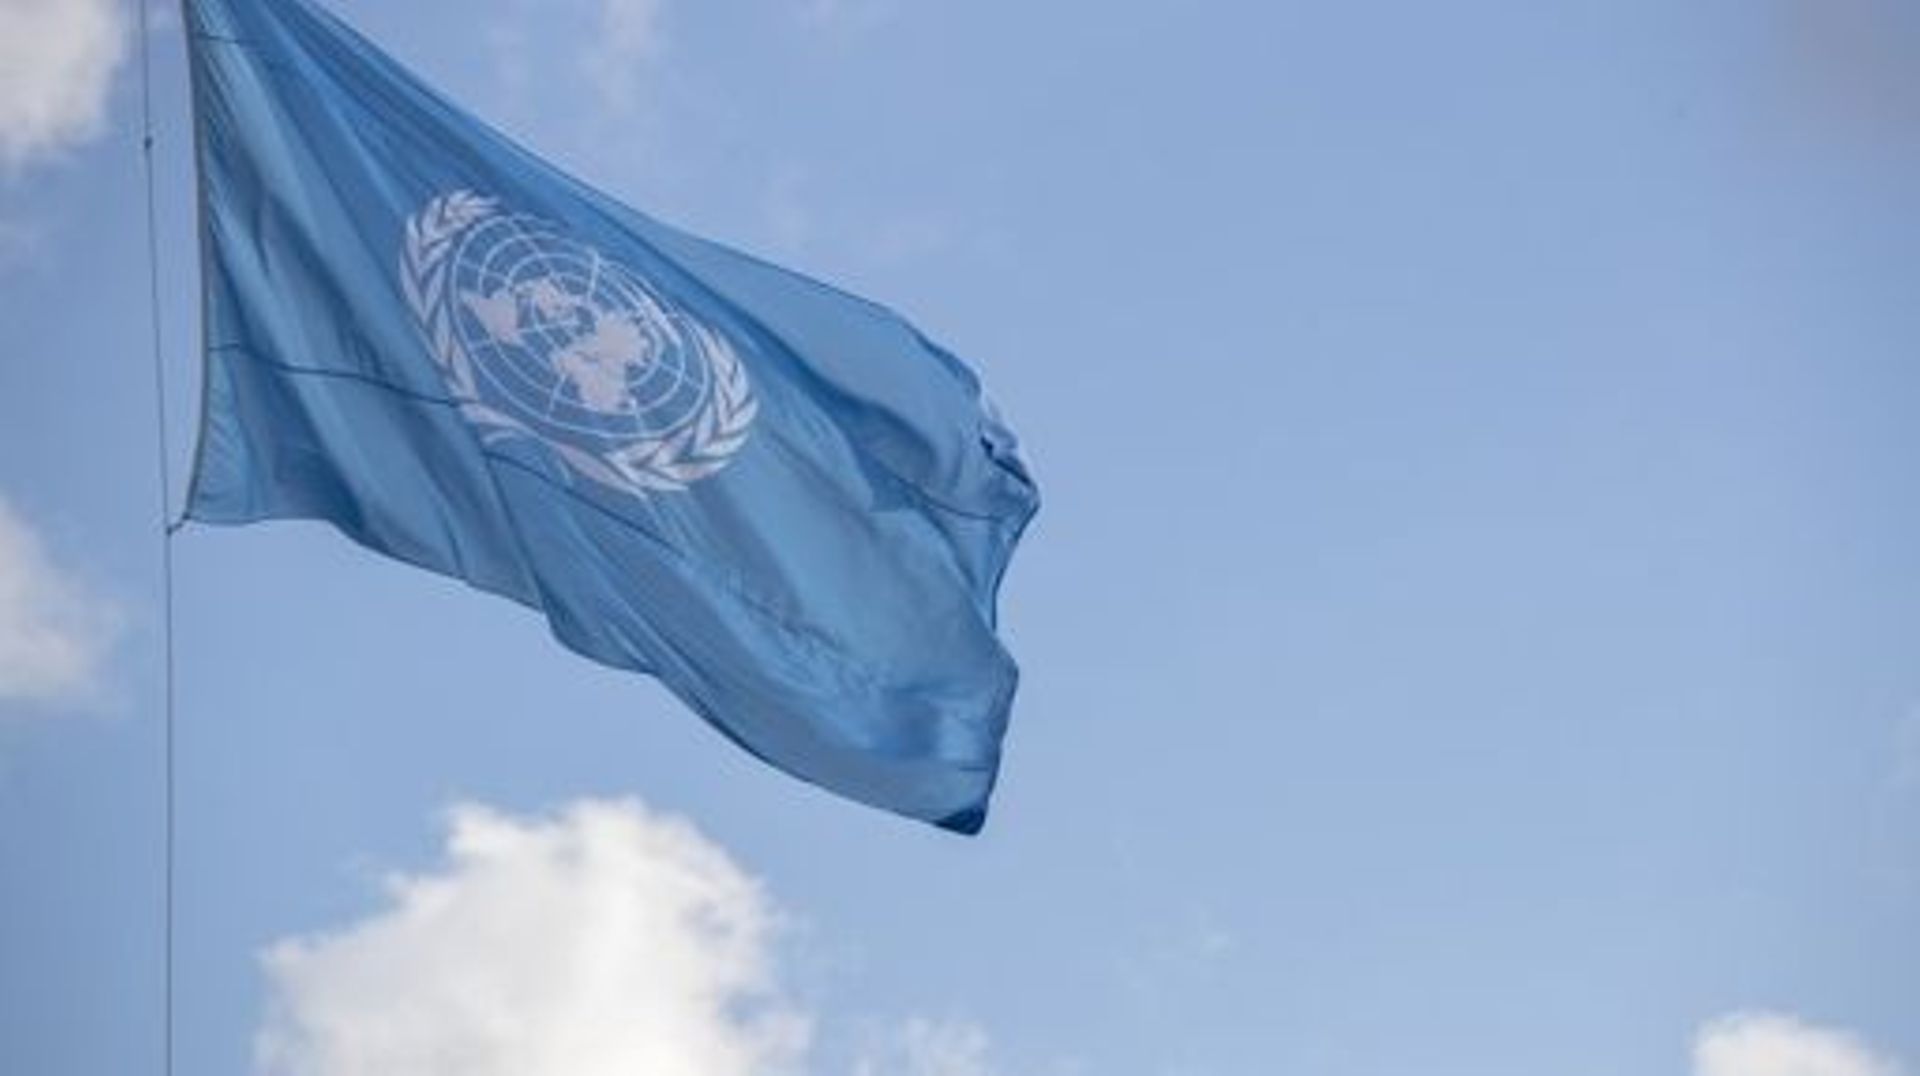 A logo flag pictured at the 77th session of the United Nations General Assembly (UNGA 77), in New York City, United States of America, Tuesday 20 September 2022. BELGA PHOTO NICOLAS MAETERLINCK